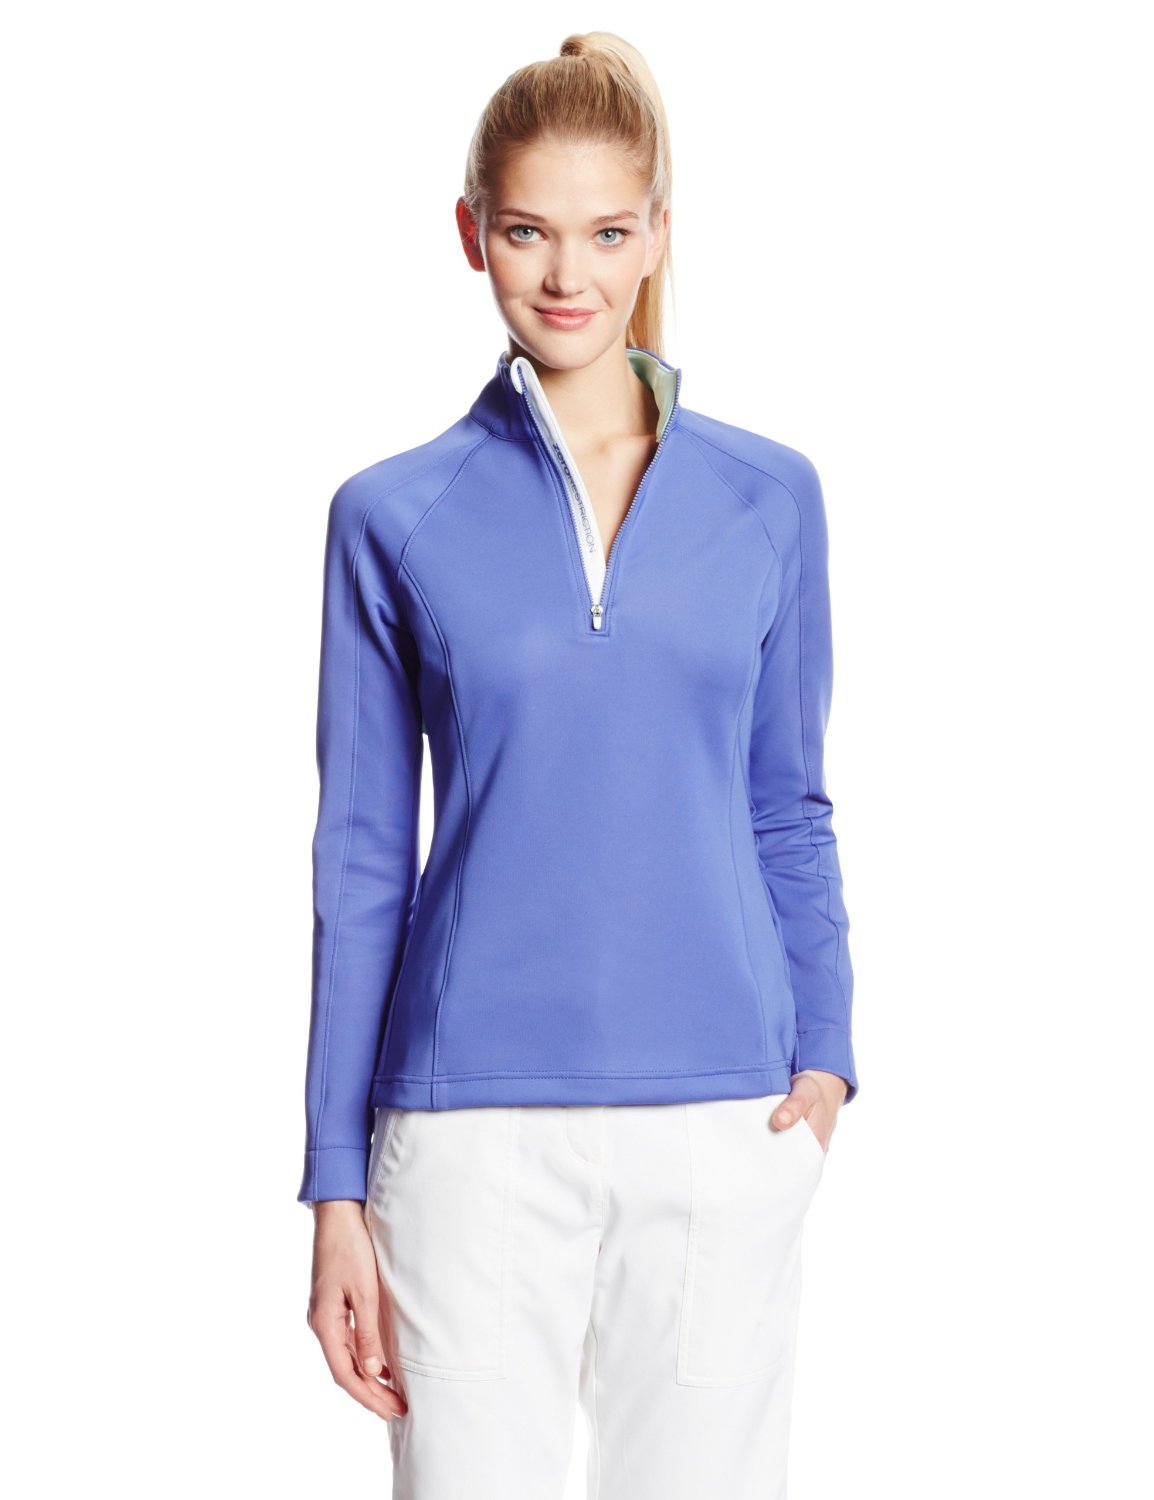 Zero Restriction Womens Samantha Double Jersey Stretch Knit Golf Pullovers